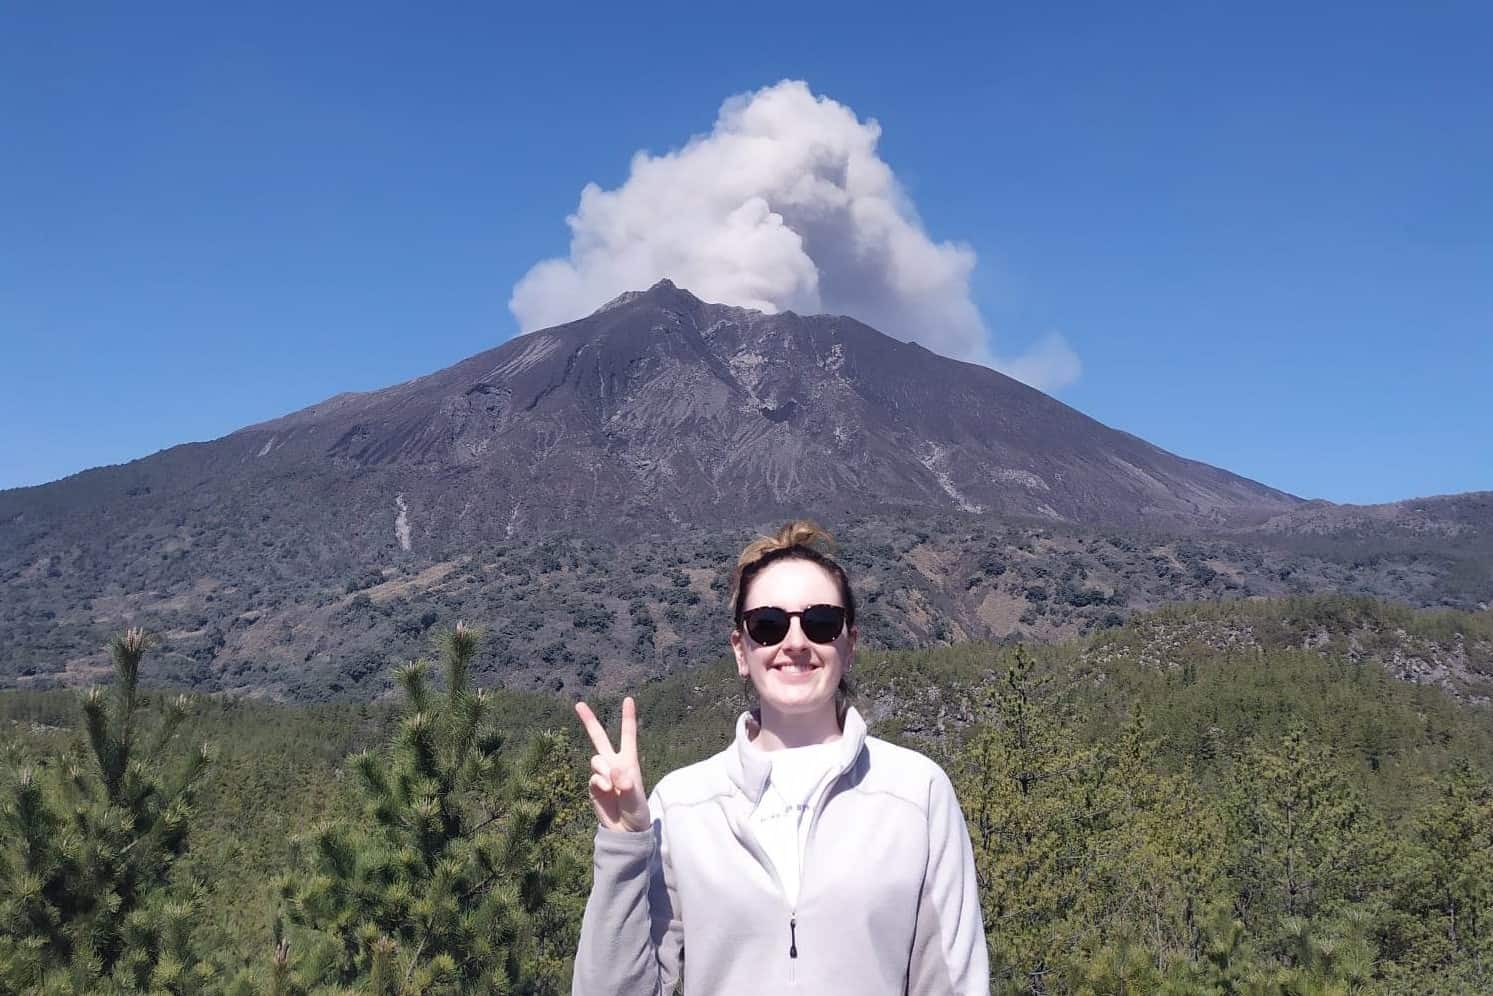 Emmy Scott standing in front of a volcano.